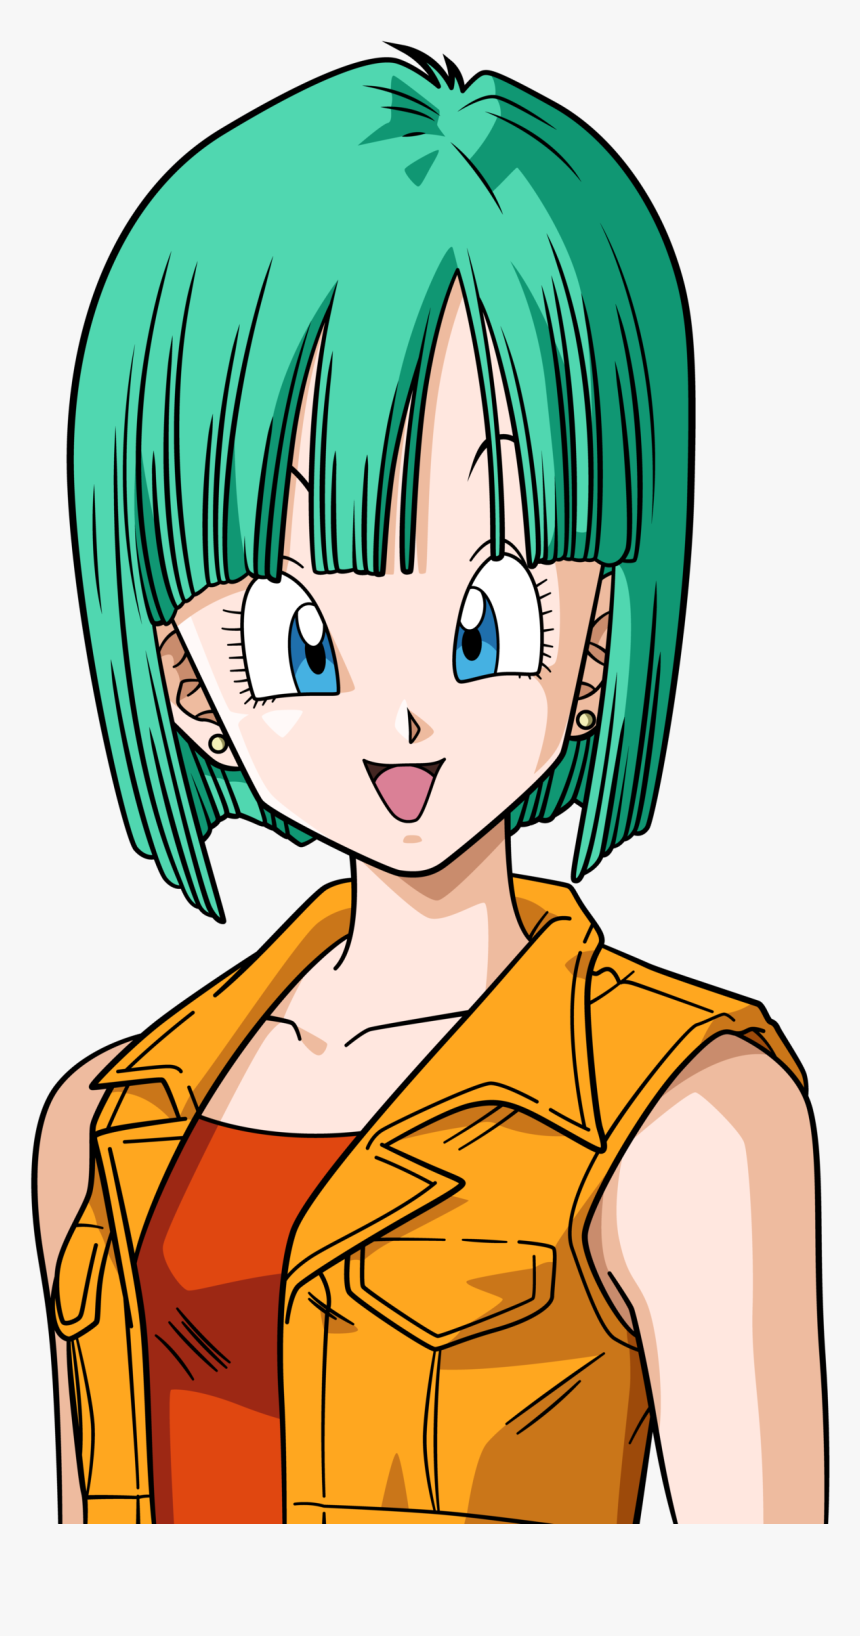 brenna stein recommends Pictures Of Bulma From Dragon Ball Z